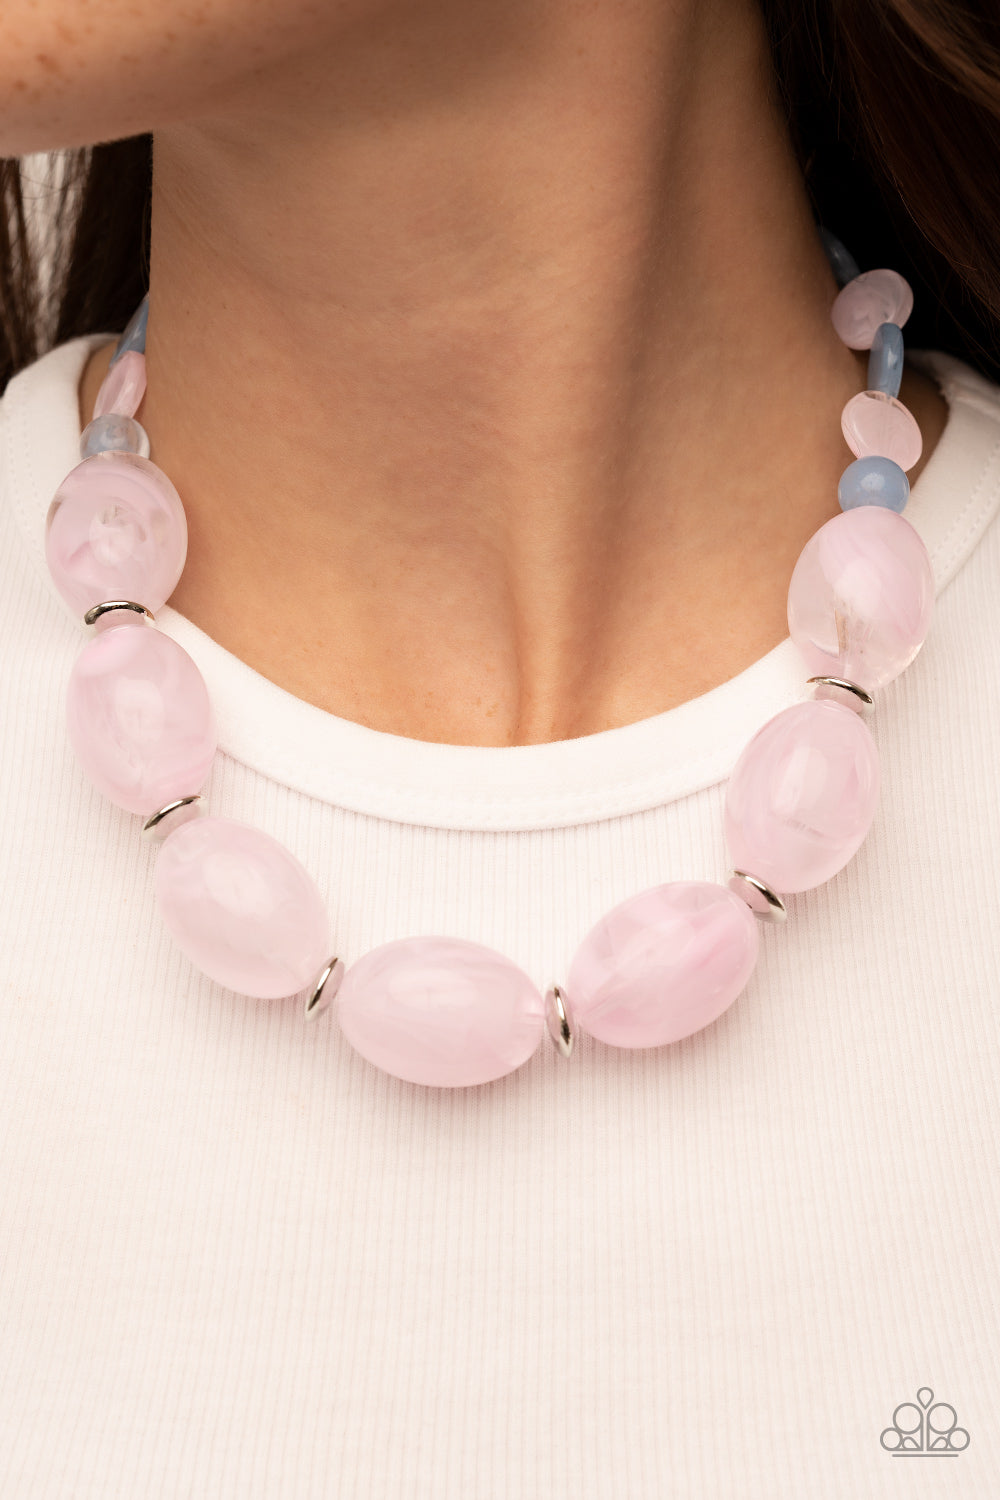 Belle of the Beach Pink Necklace- Paparazzi Accessories   Featuring cloudy acrylic finishes, flat Pale Rosette and Spring Lake discs alternate along an invisible wire, giving way to an oversized collection of cloudy oval Pale Rosette beads for an ethereal pop of color below the collar. Features an adjustable clasp closure.  Sold as one individual necklace. Includes one pair of matching earrings.